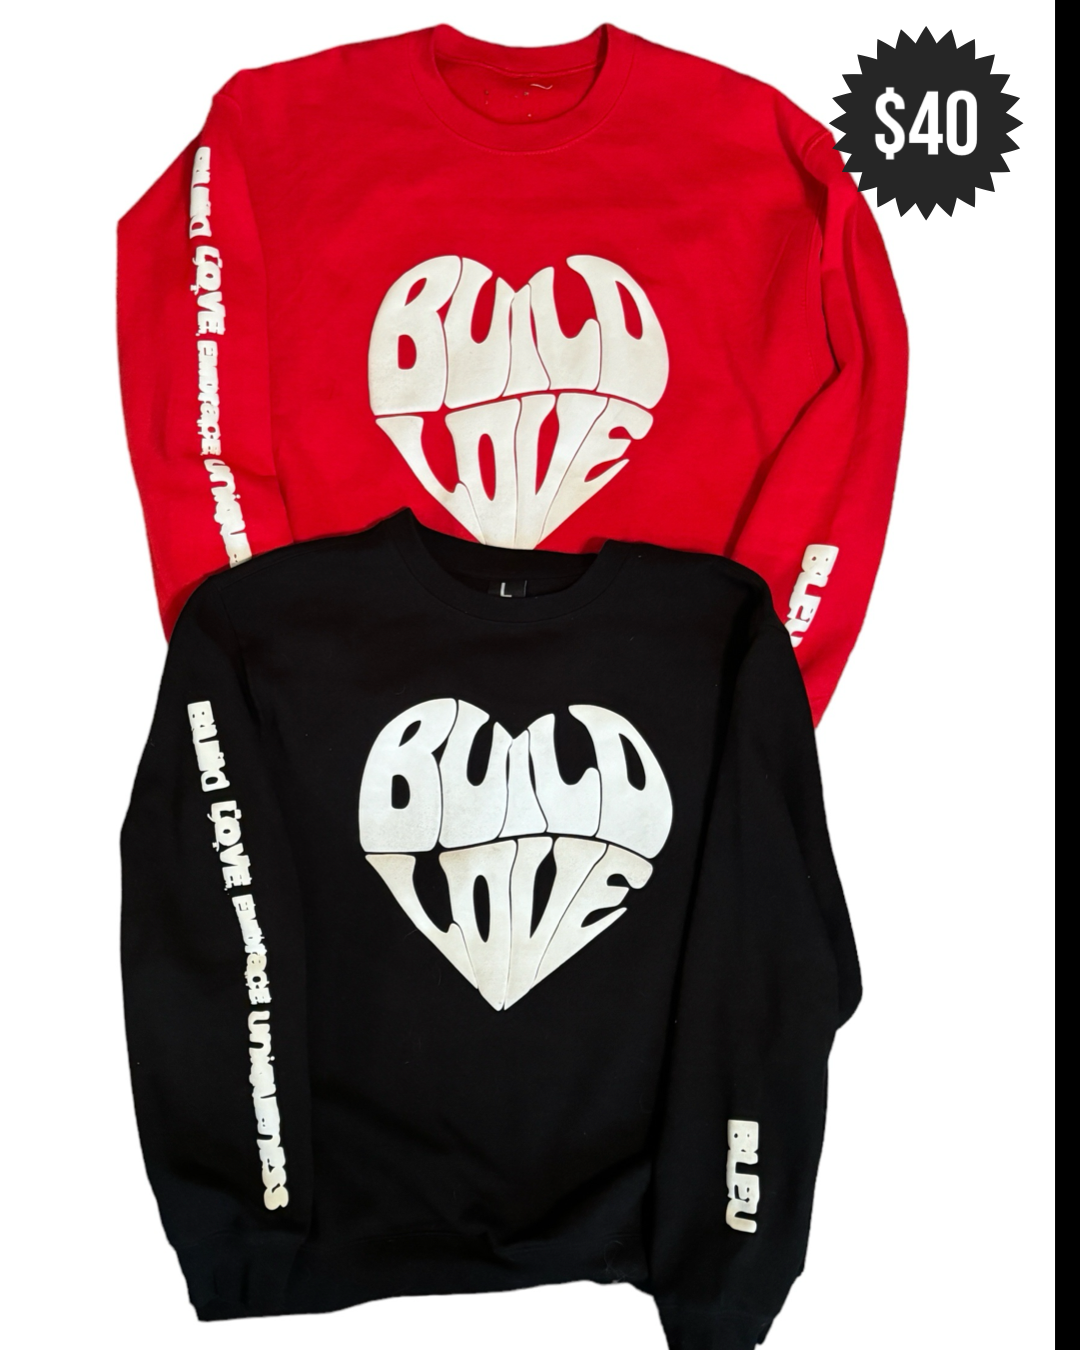 2 for $40 Bundle Red and Black Build Love Crew Neck